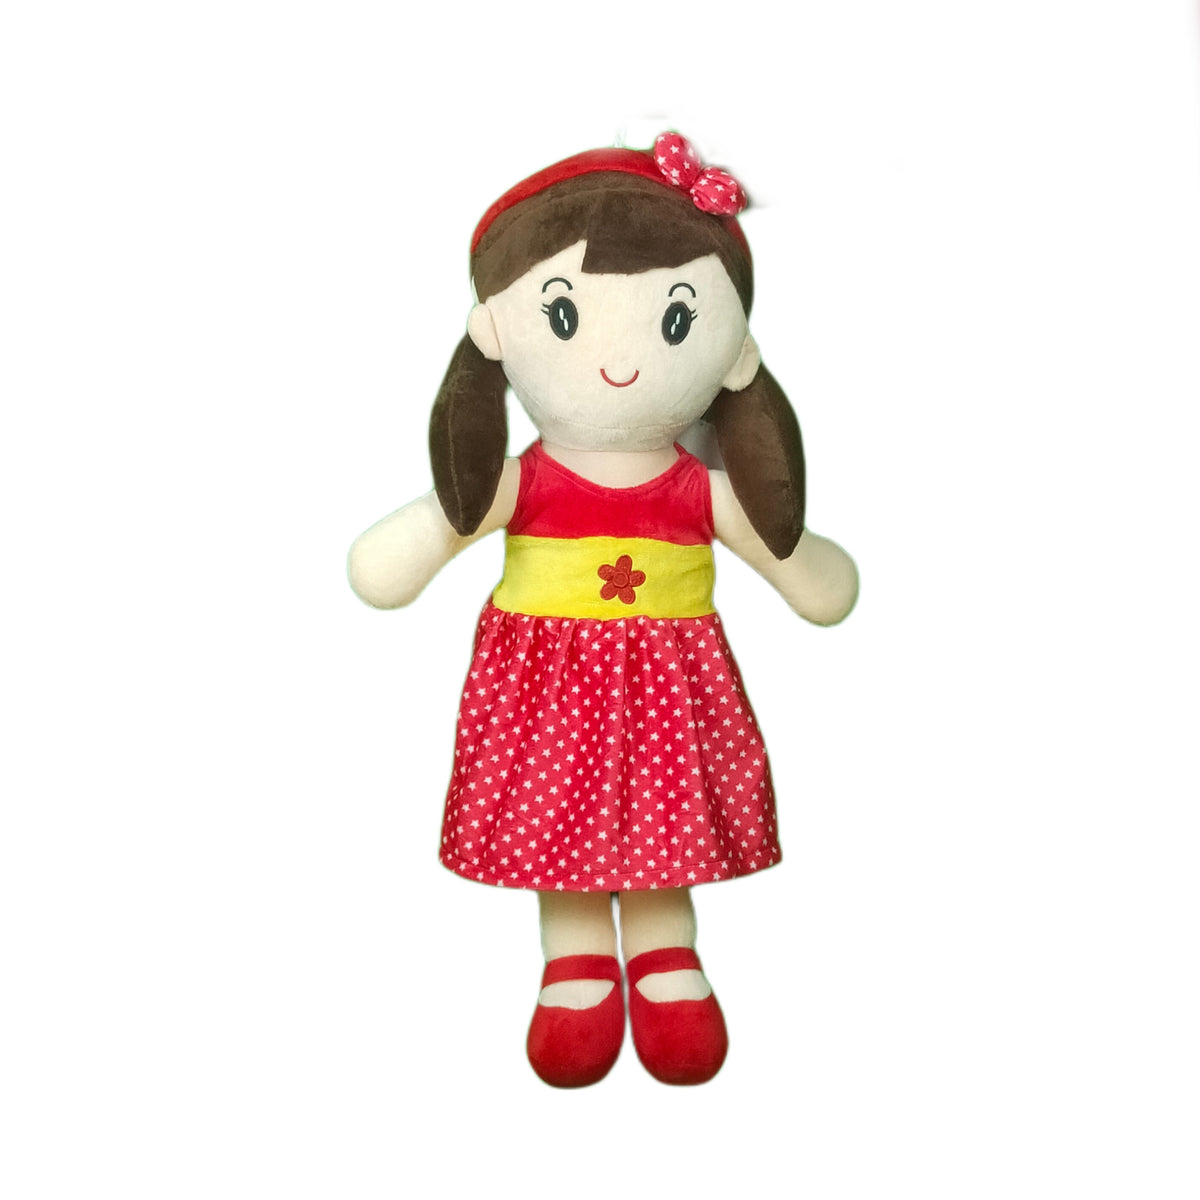 Play Hour Cute Rag Doll Plush Soft Toy Wearing Red Polka Dot Frock for Ages 3 Years and Up, 60cm